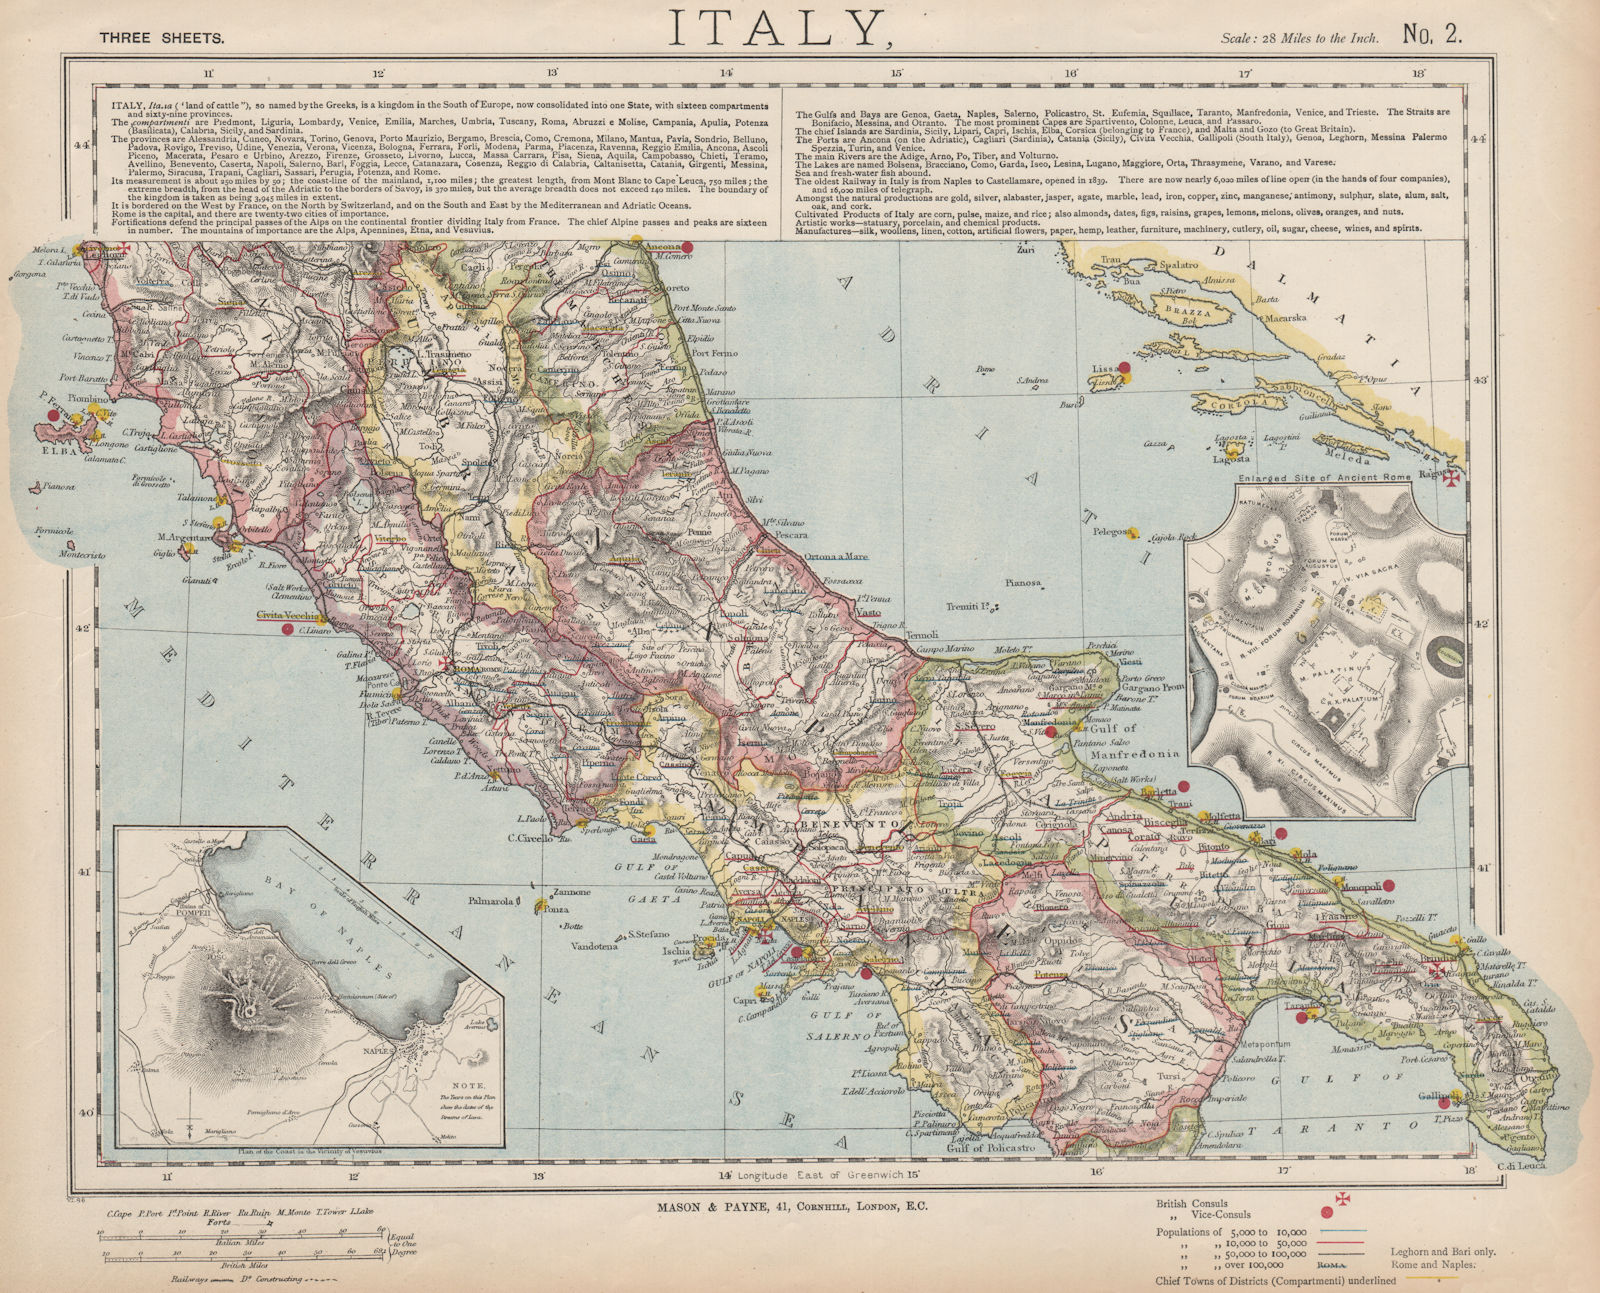 CENTRAL ITALY. Campania Umbria. British consulates Lighthouses. LETTS 1889 map